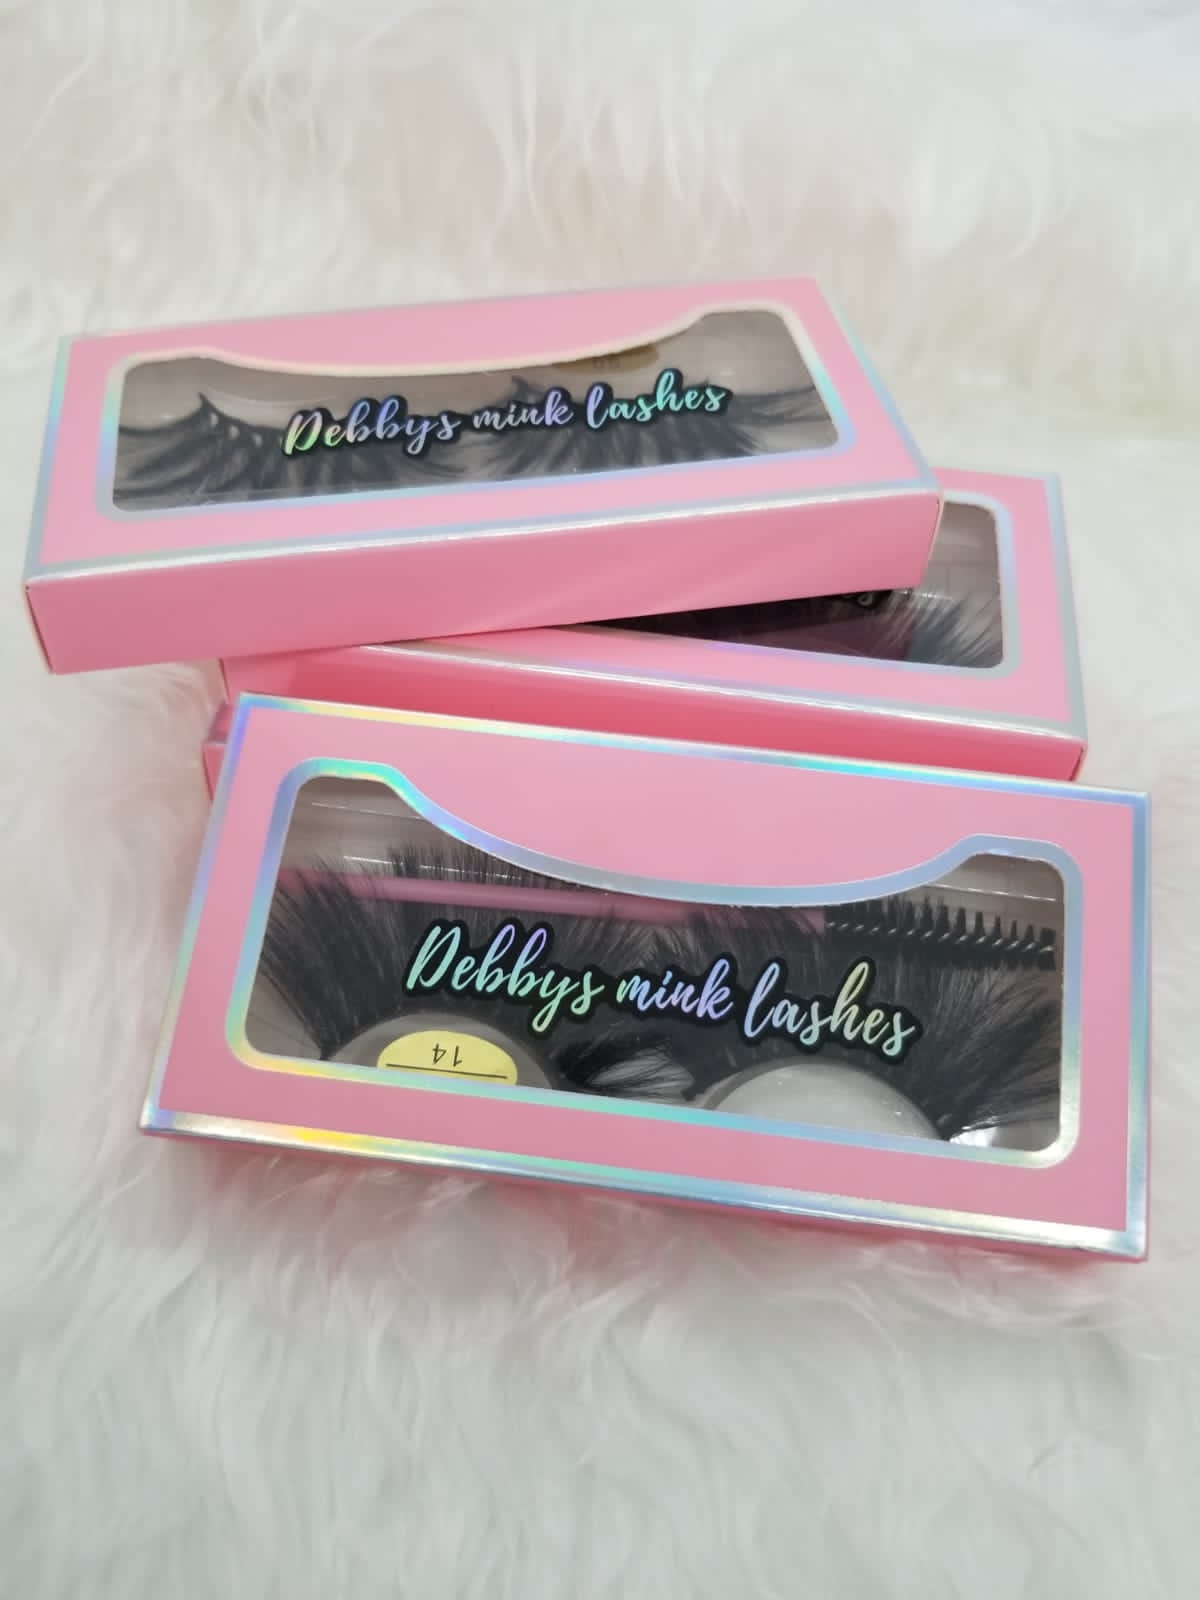 DEBBY'S MINK LASHES